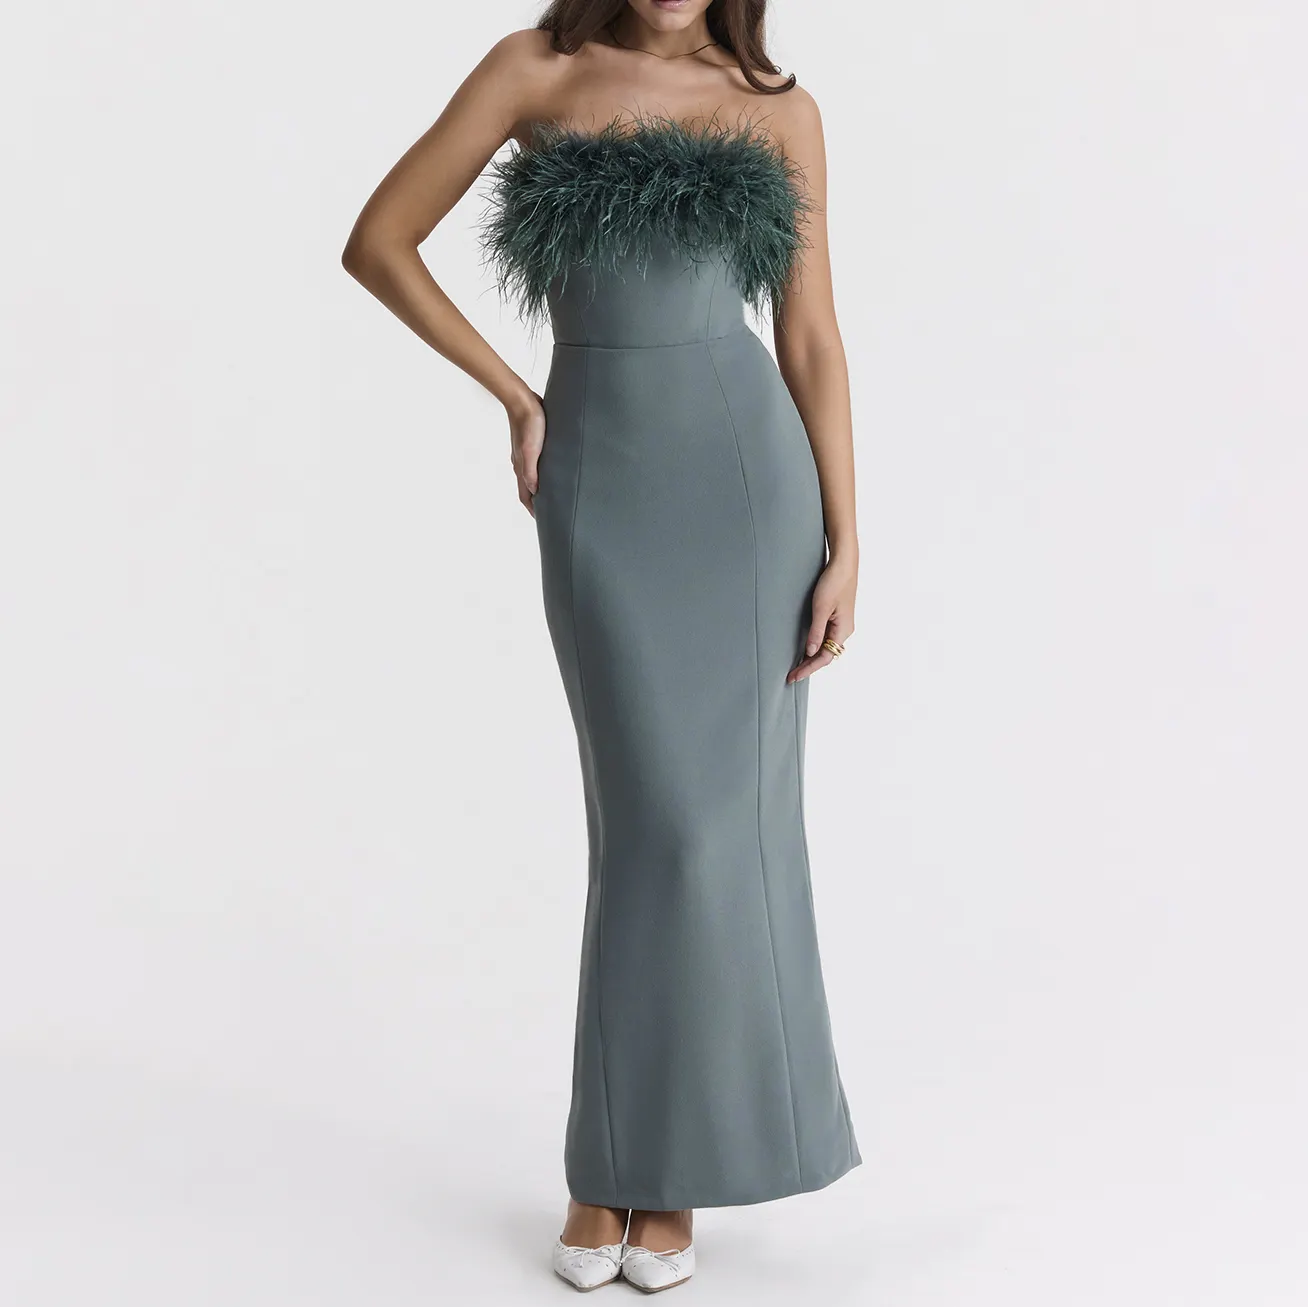 Elegant Maxi Dress Corset Neckline Luxurious Feather Slit Fully Lined Gorgeous Events Weddings Champagne Evening Dress